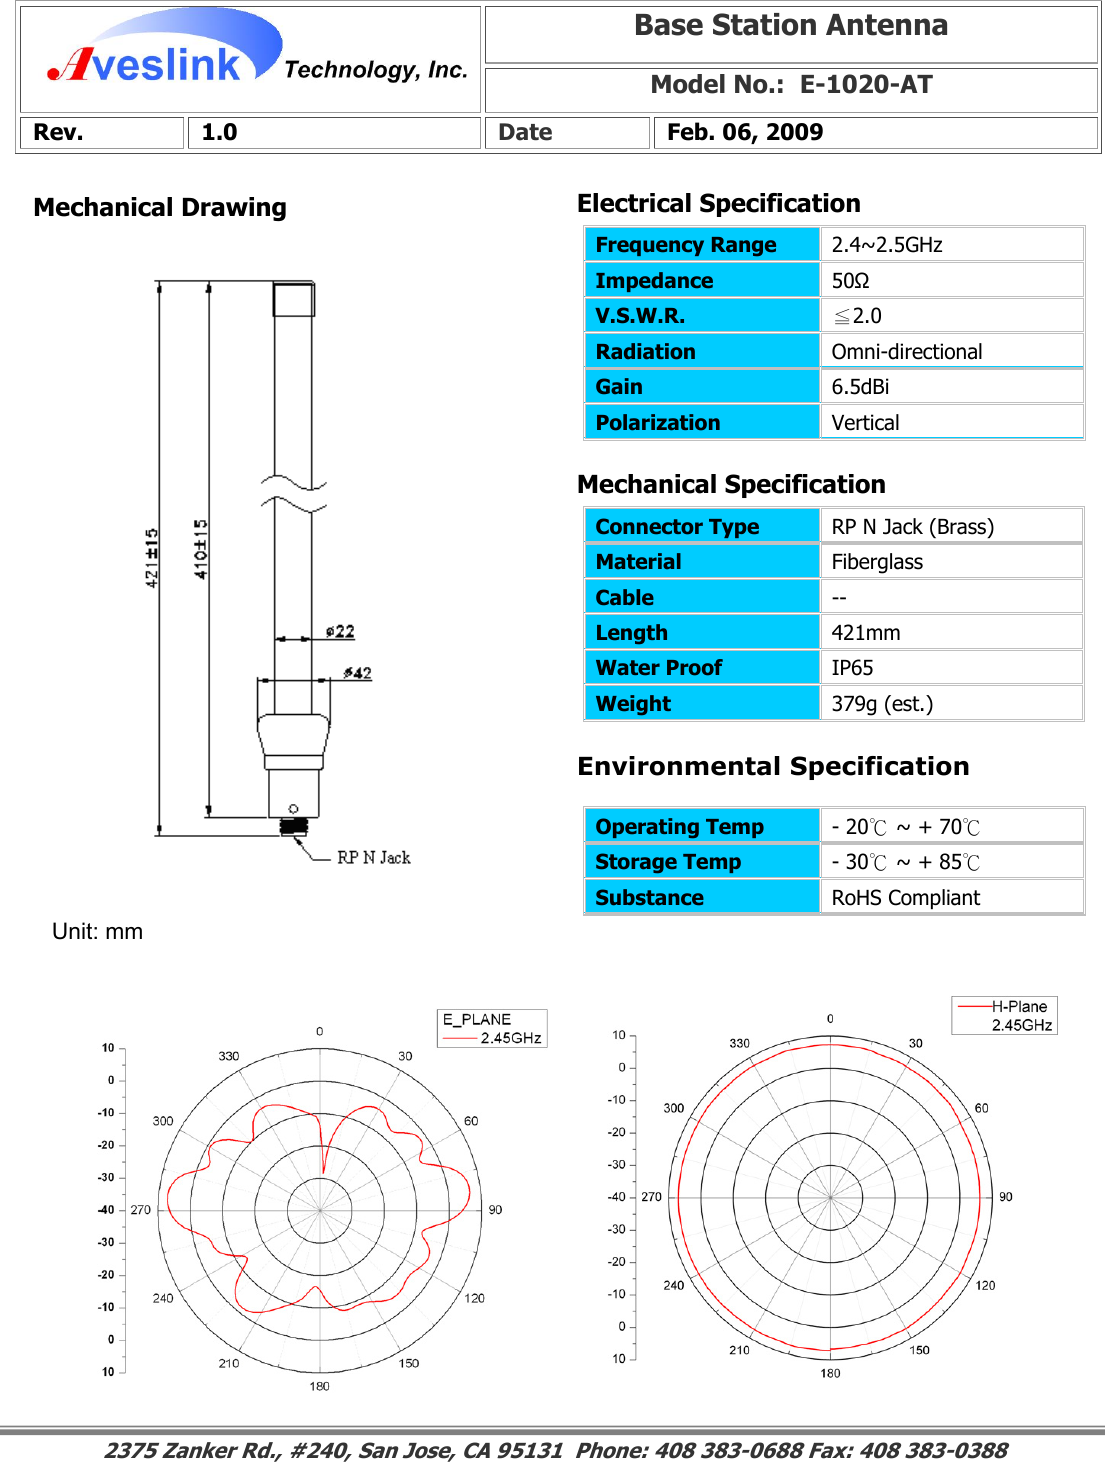 Mechanical DrawingMechanical Specification Environmental SpecificationBase Station Antenna Model No.:  E-1020-ATRev. 1.0  Date  Feb. 06, 2009 Connector Type   RP N Jack (Brass) Material  Fiberglass Cable  -- Length  421mm Water Proof  IP65 Weight  379g (est.)                                                                                                                                                                                                                        2375 Zanker Rd., #240, San Jose, CA 95131  Phone: 408 383-0688 Fax: 408 383-0388 Operating Temp  - 20℃ ~ + 70℃ Storage Temp  - 30℃ ~ + 85℃ Substance  RoHS Compliant Electrical SpecificationFrequency Range   2.4~2.5GHz Impedance  50Ω V.S.W.R.  ≦2.0 Radiation  Omni-directional Gain  6.5dBi Polarization  Vertical Unit: mm 